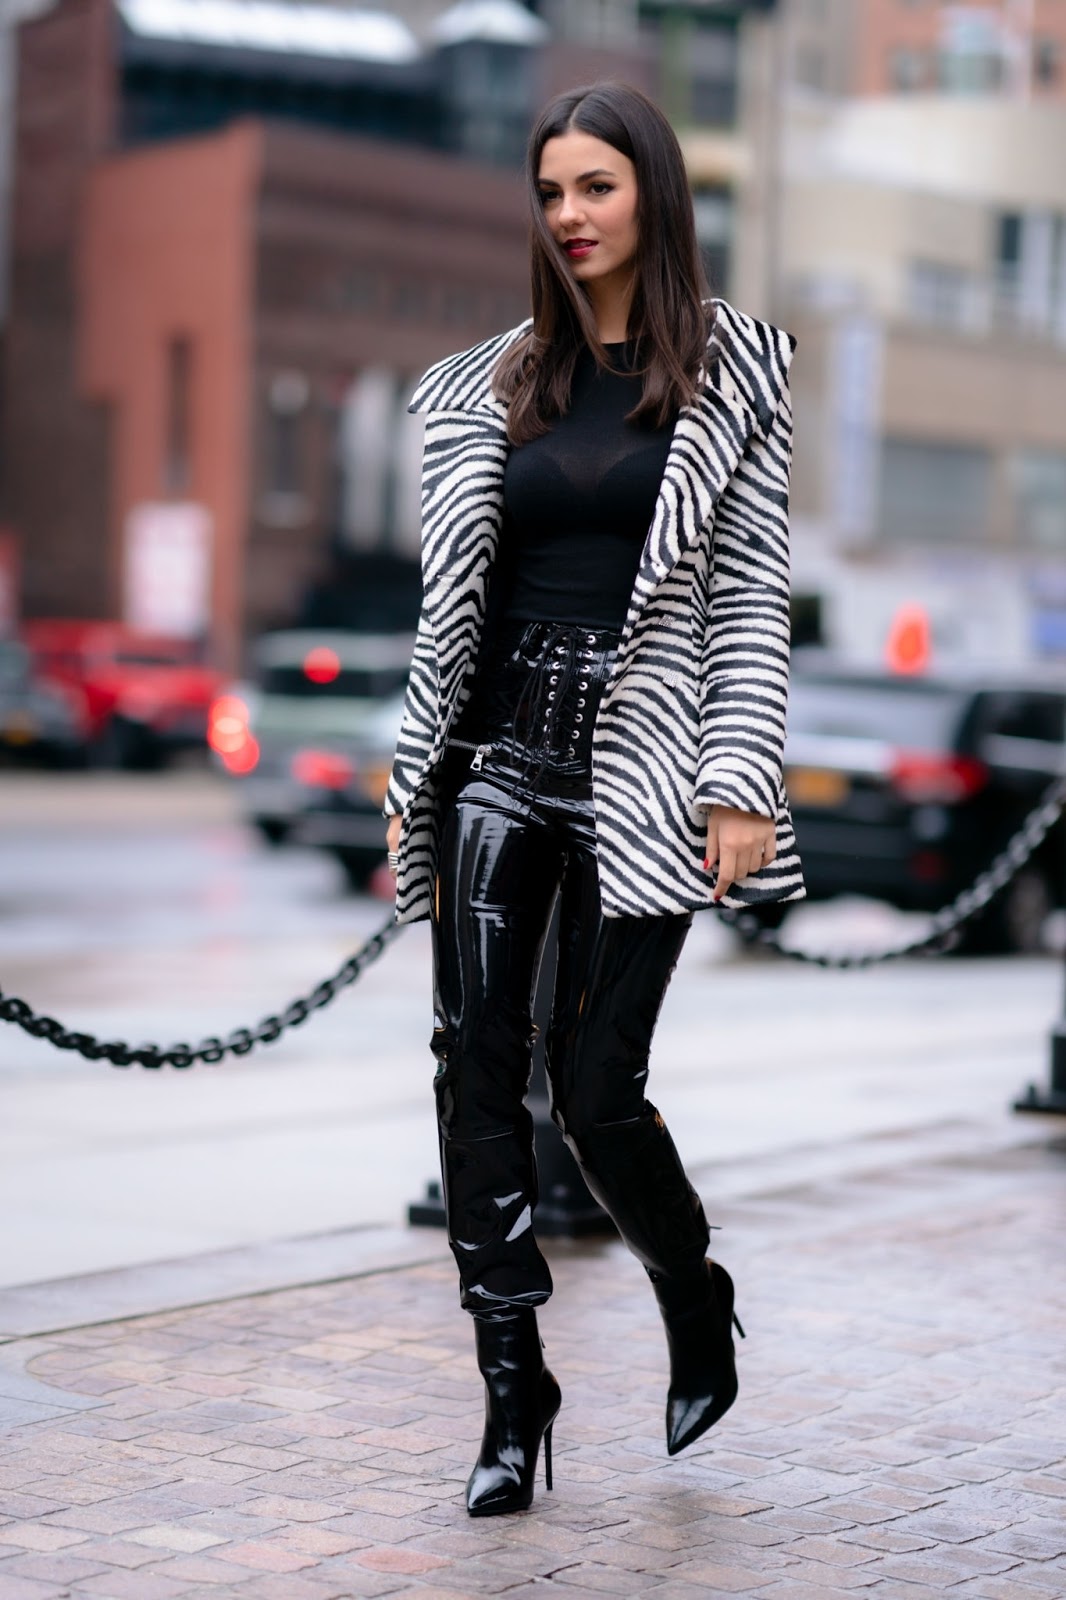 Lovely Ladies in Leather: Victoria Justice in PVC pants